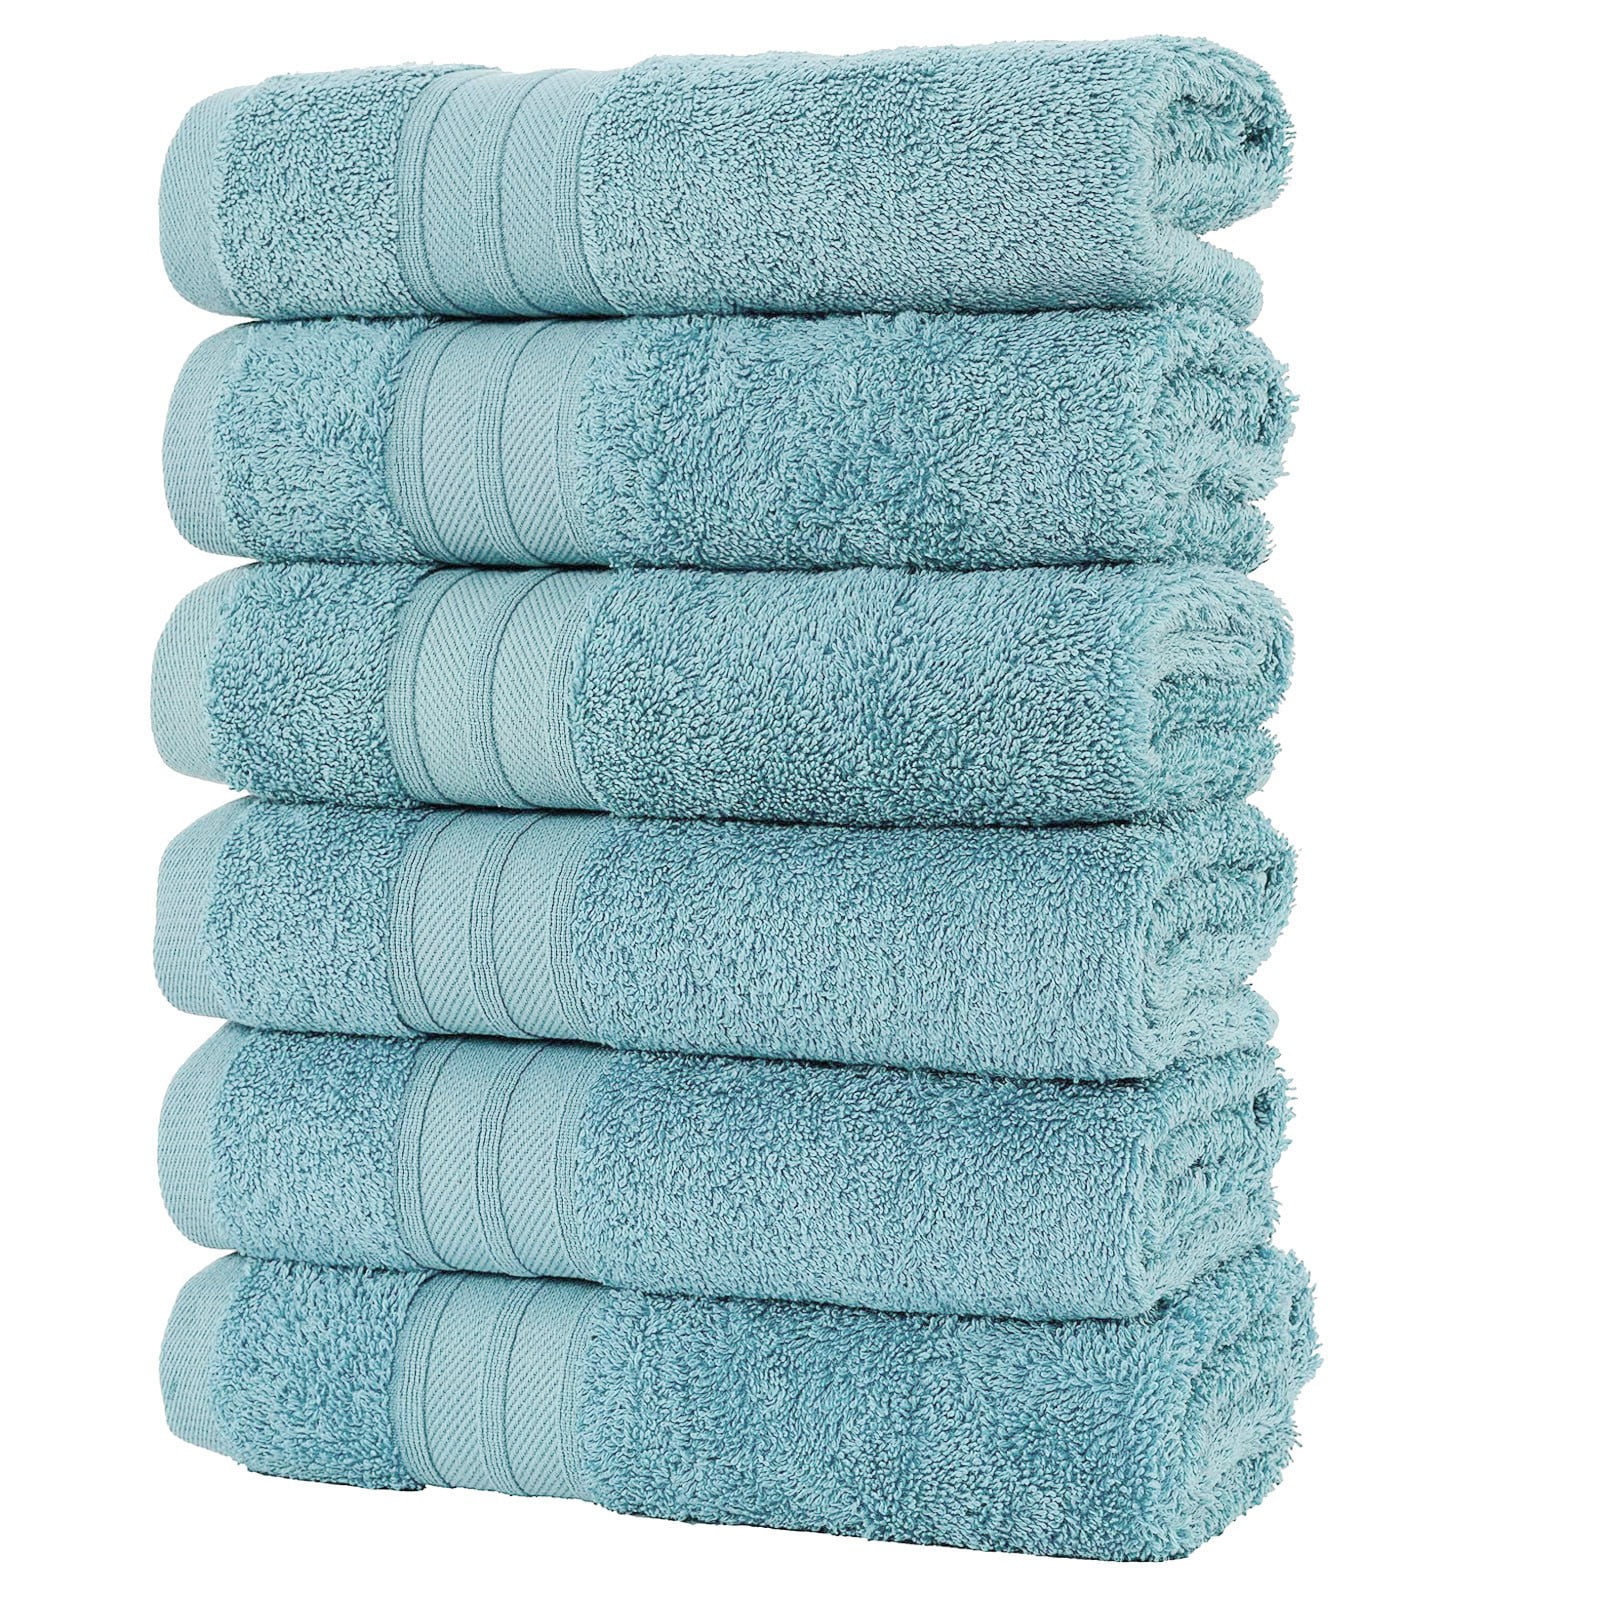 Details about   Egyptian Cotton Absorbent 3 Piece Bath Hand Face Towel Set by Blue Nile Mills 